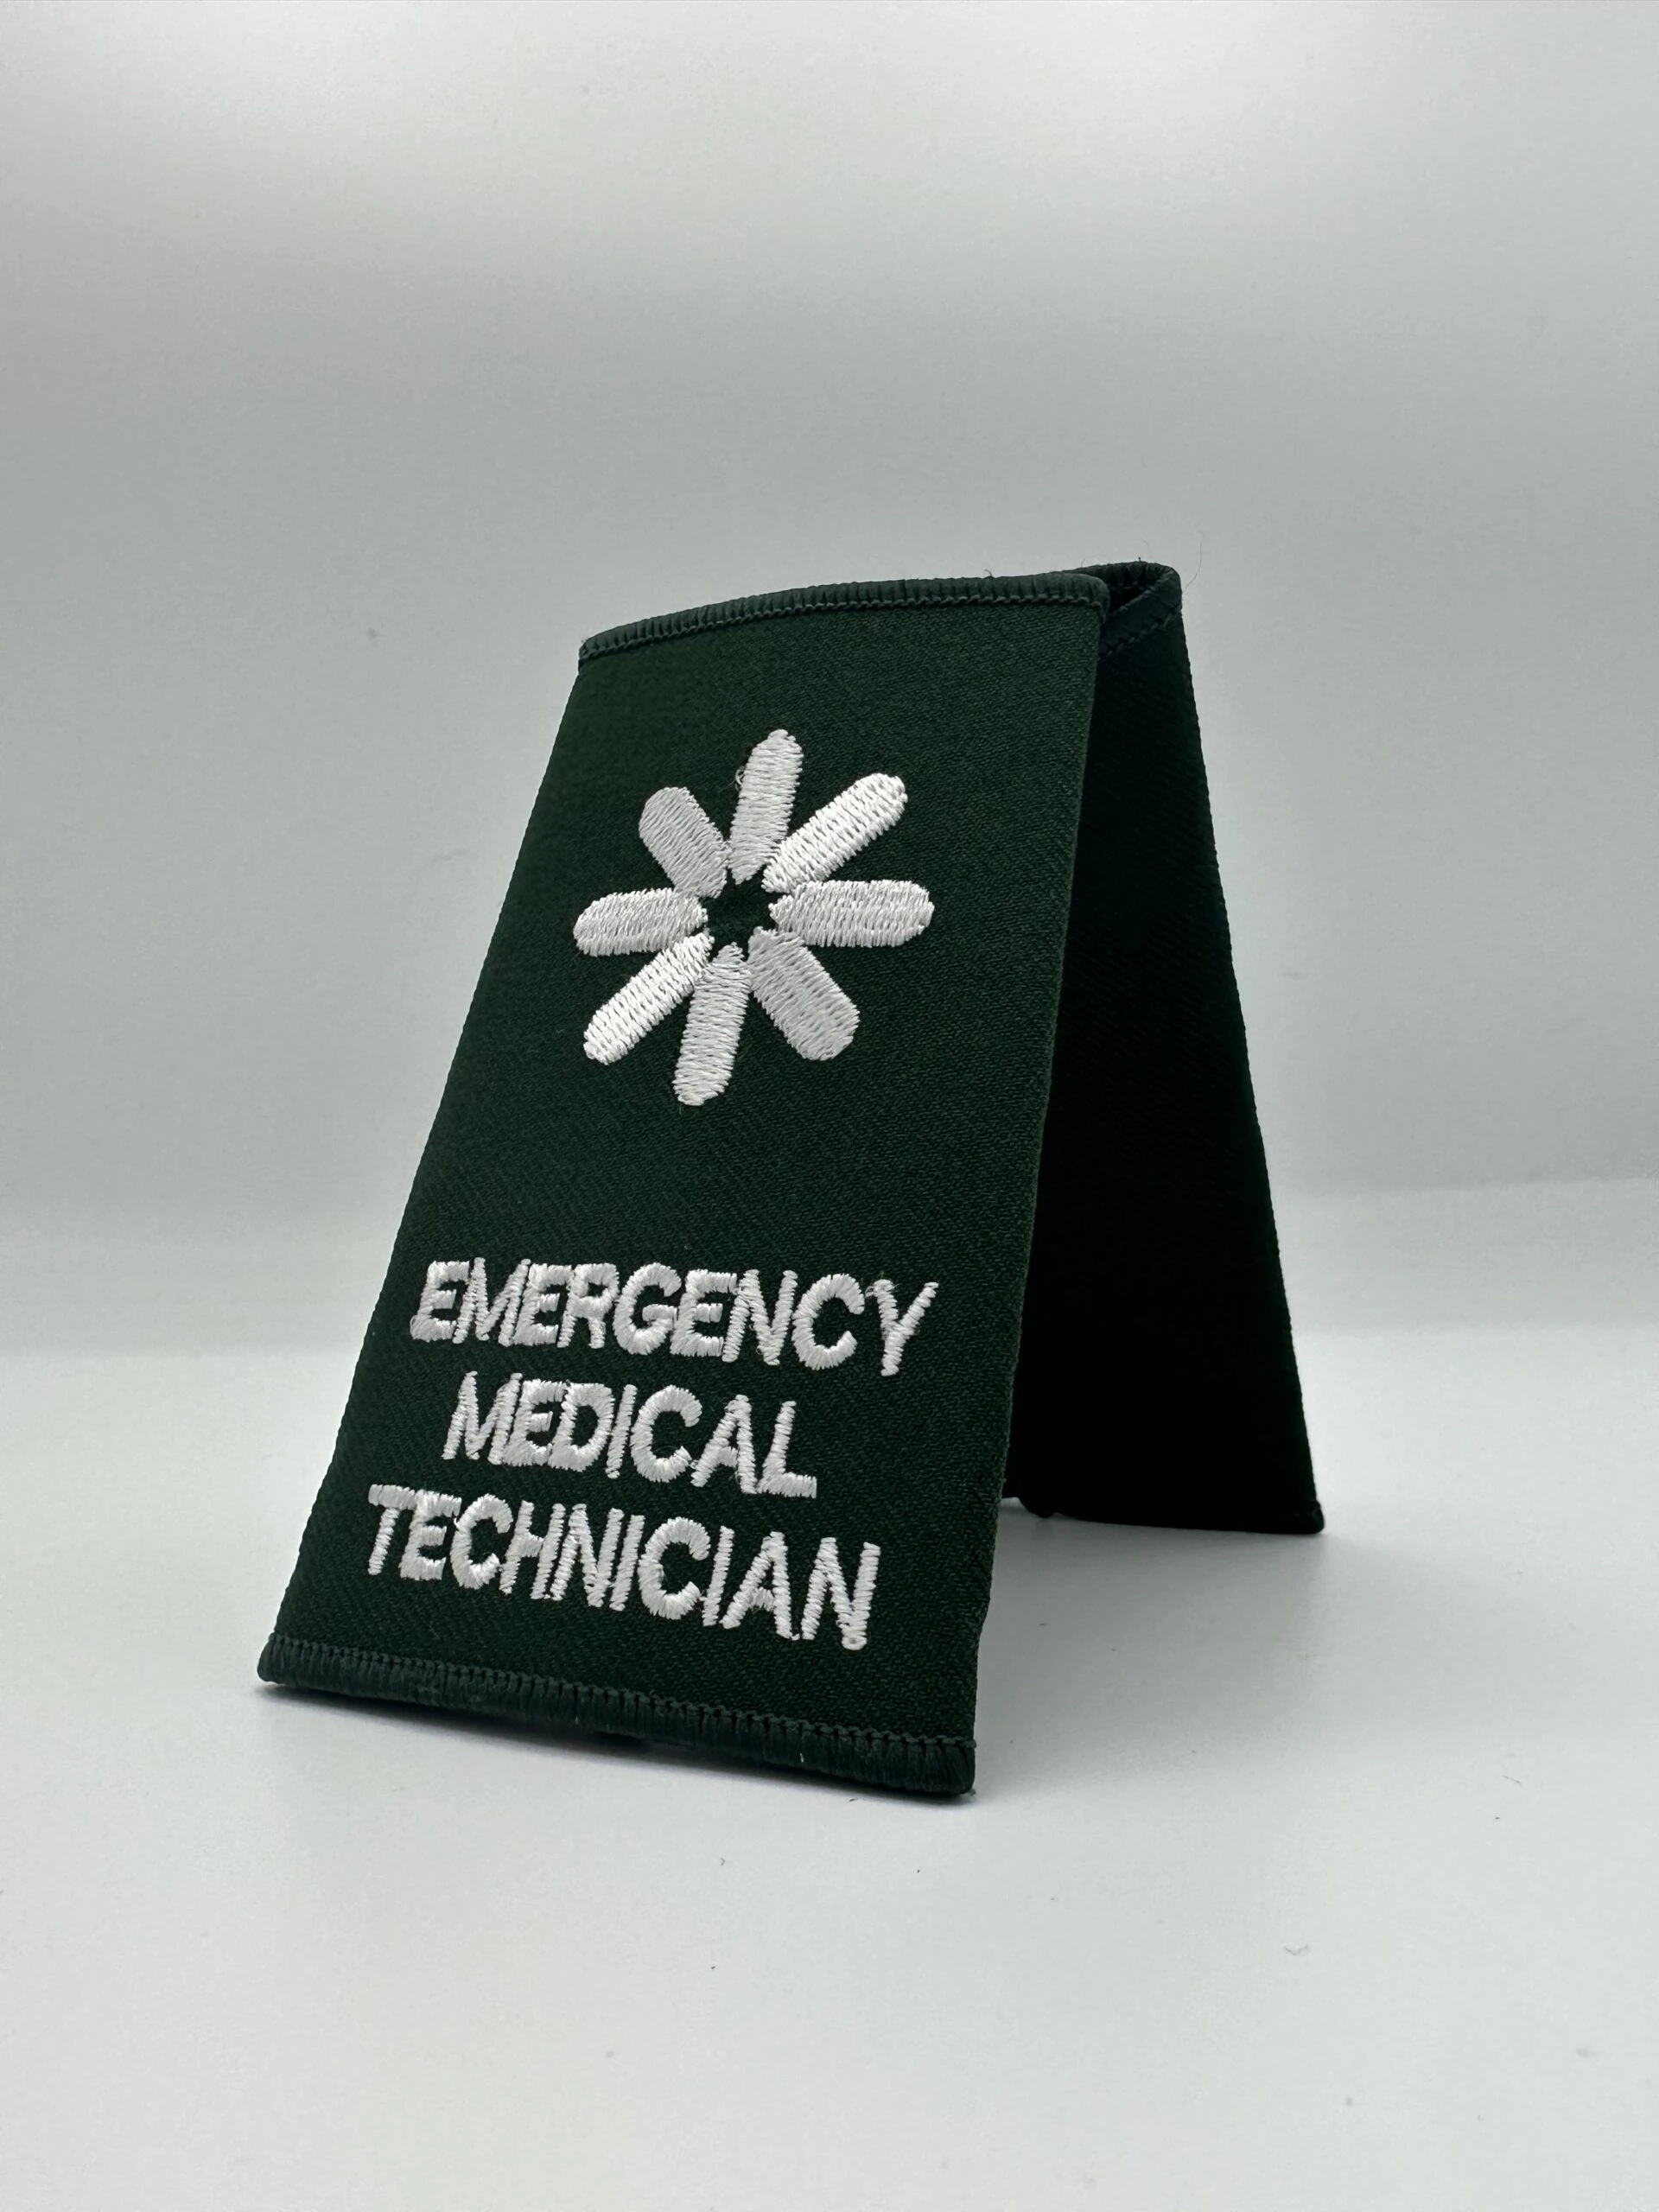 Two epaulettes back to back, embroidered with the words "Emergency Medical Technician", a type of clinical used for event medical cover.